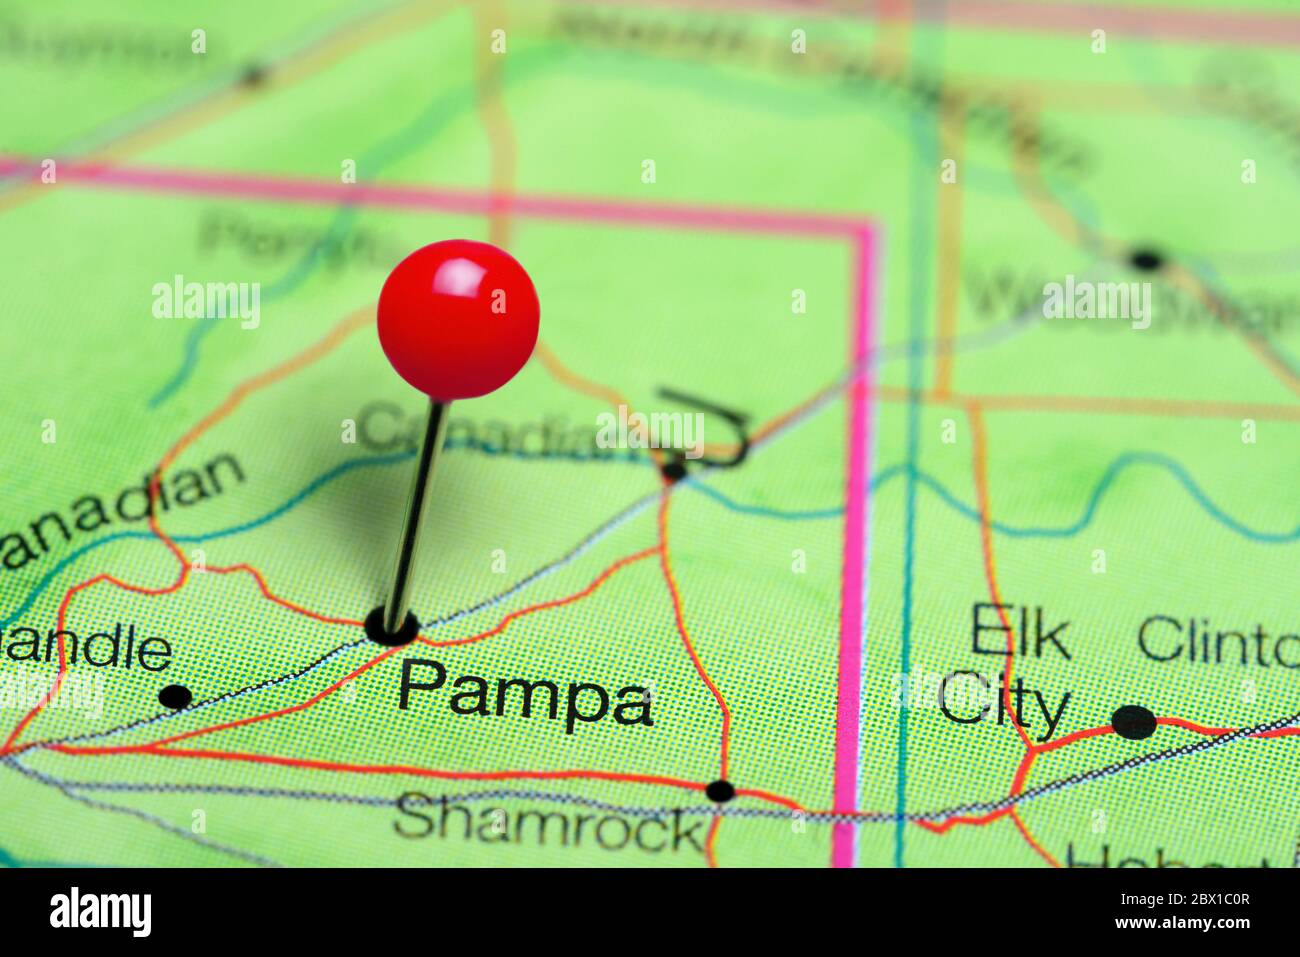 Pampa pinned on a map of Texas, USA Stock Photo